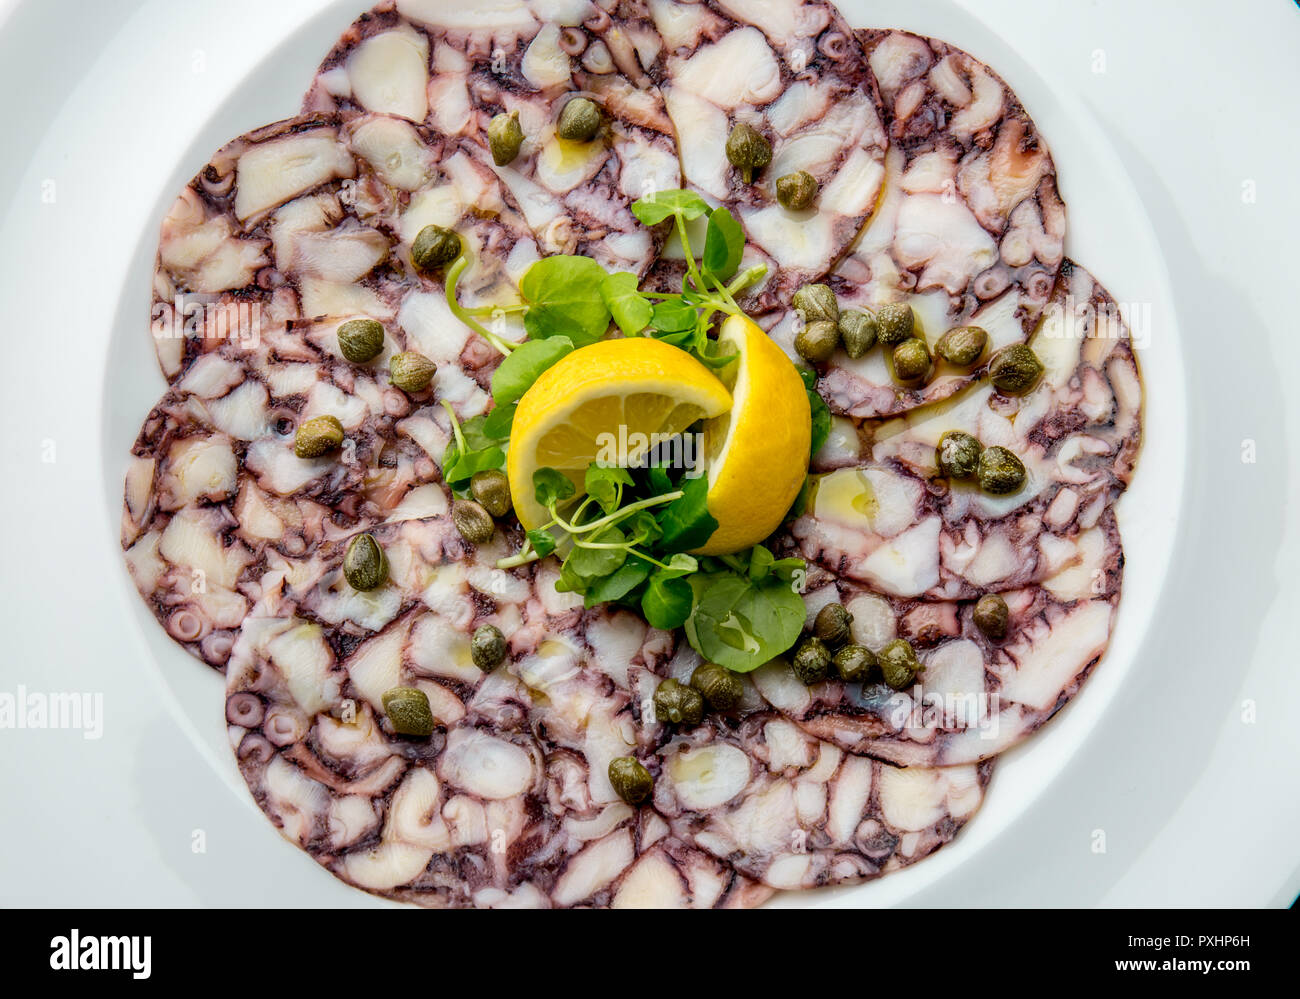 OCTOPUS CARPACCIO. Seafood Raw octopus slices with olive oil, lemon and capers on white plate. Top view. Gray stone background Stock Photo